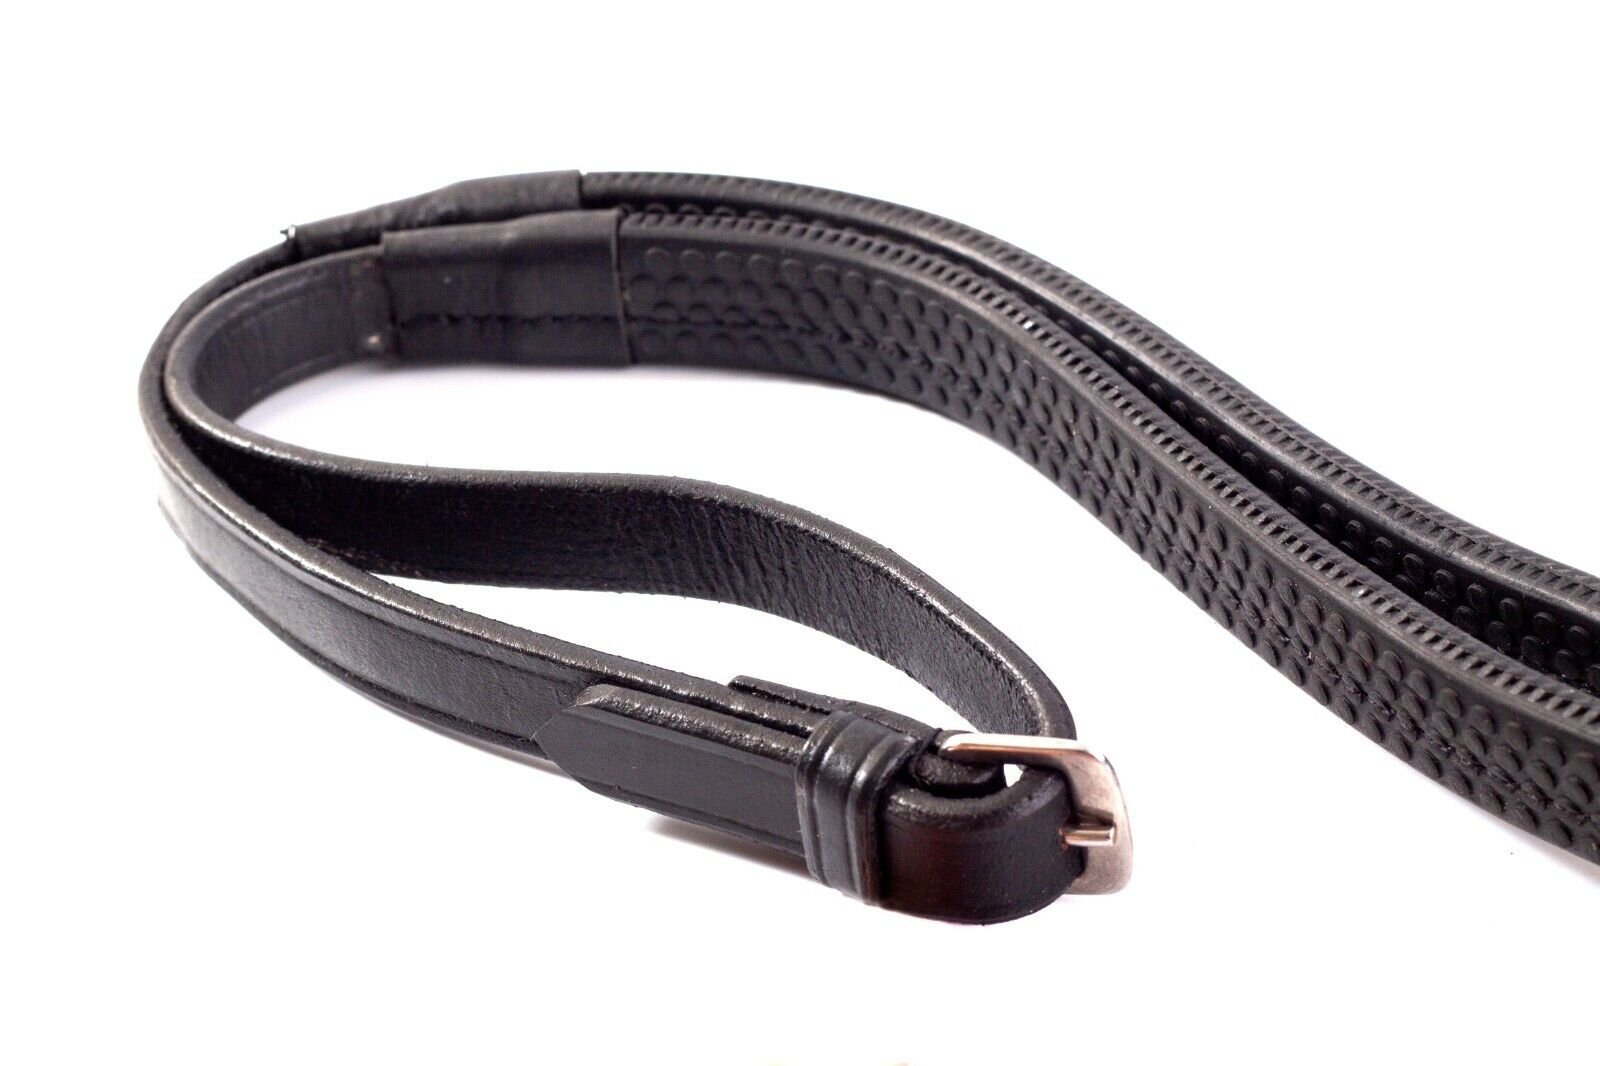 Gee Tac Extra Leather Grip Reins - Pony - 54 Inches - Black